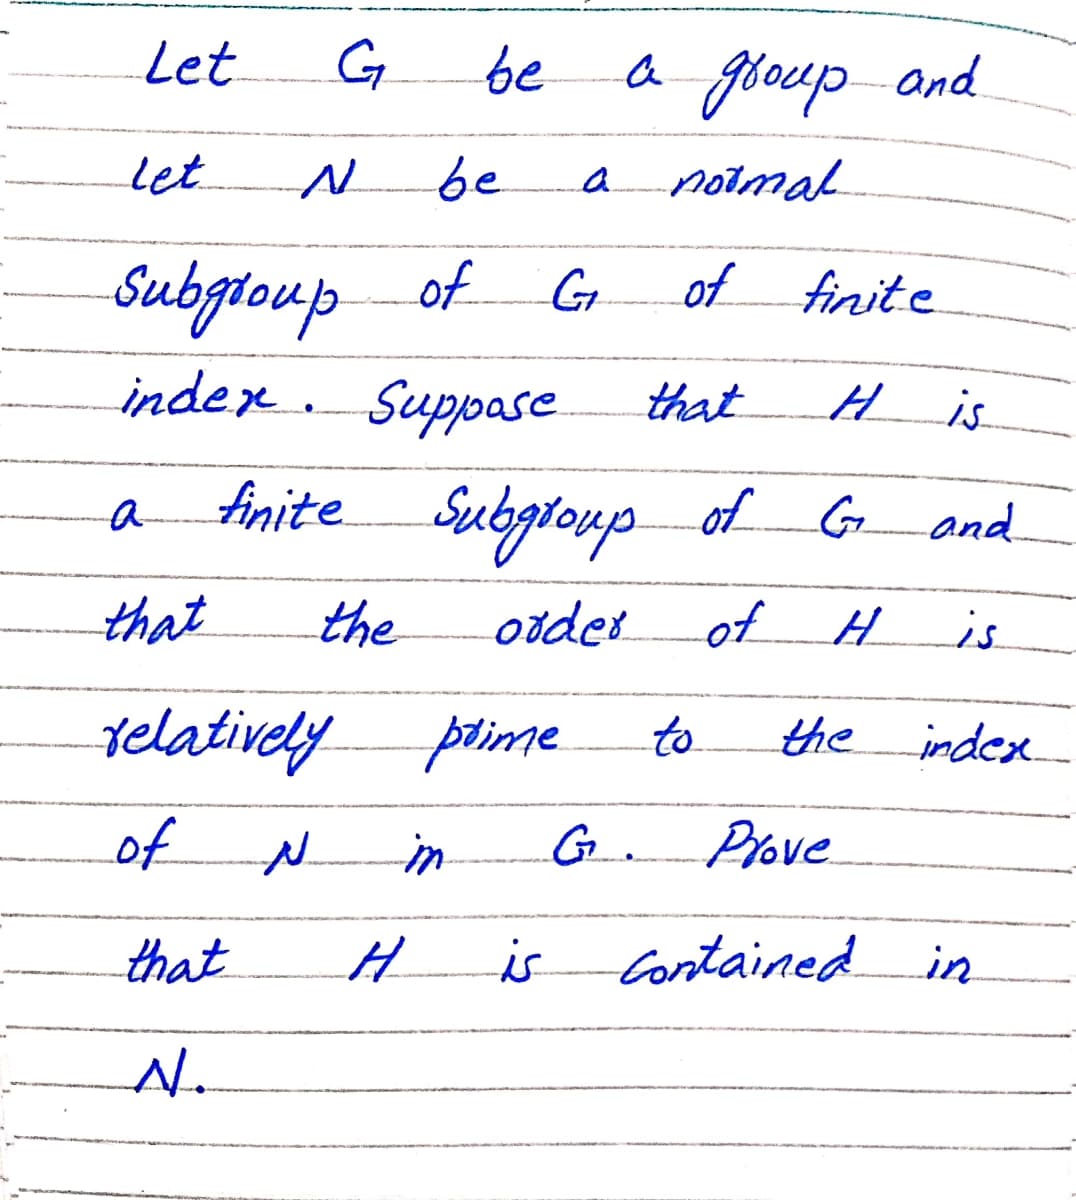 Let
G
be
a goup and
let.
be
yomal
a
Subgtoup of G
of finite
inder. Suppase
that
is
Anite Subgroup of G.
Subploup of G and
a
that
the
otder
of
is
telatively pime
to
the
index.
of
in
G..
Prove
that
is Contained in
N.
